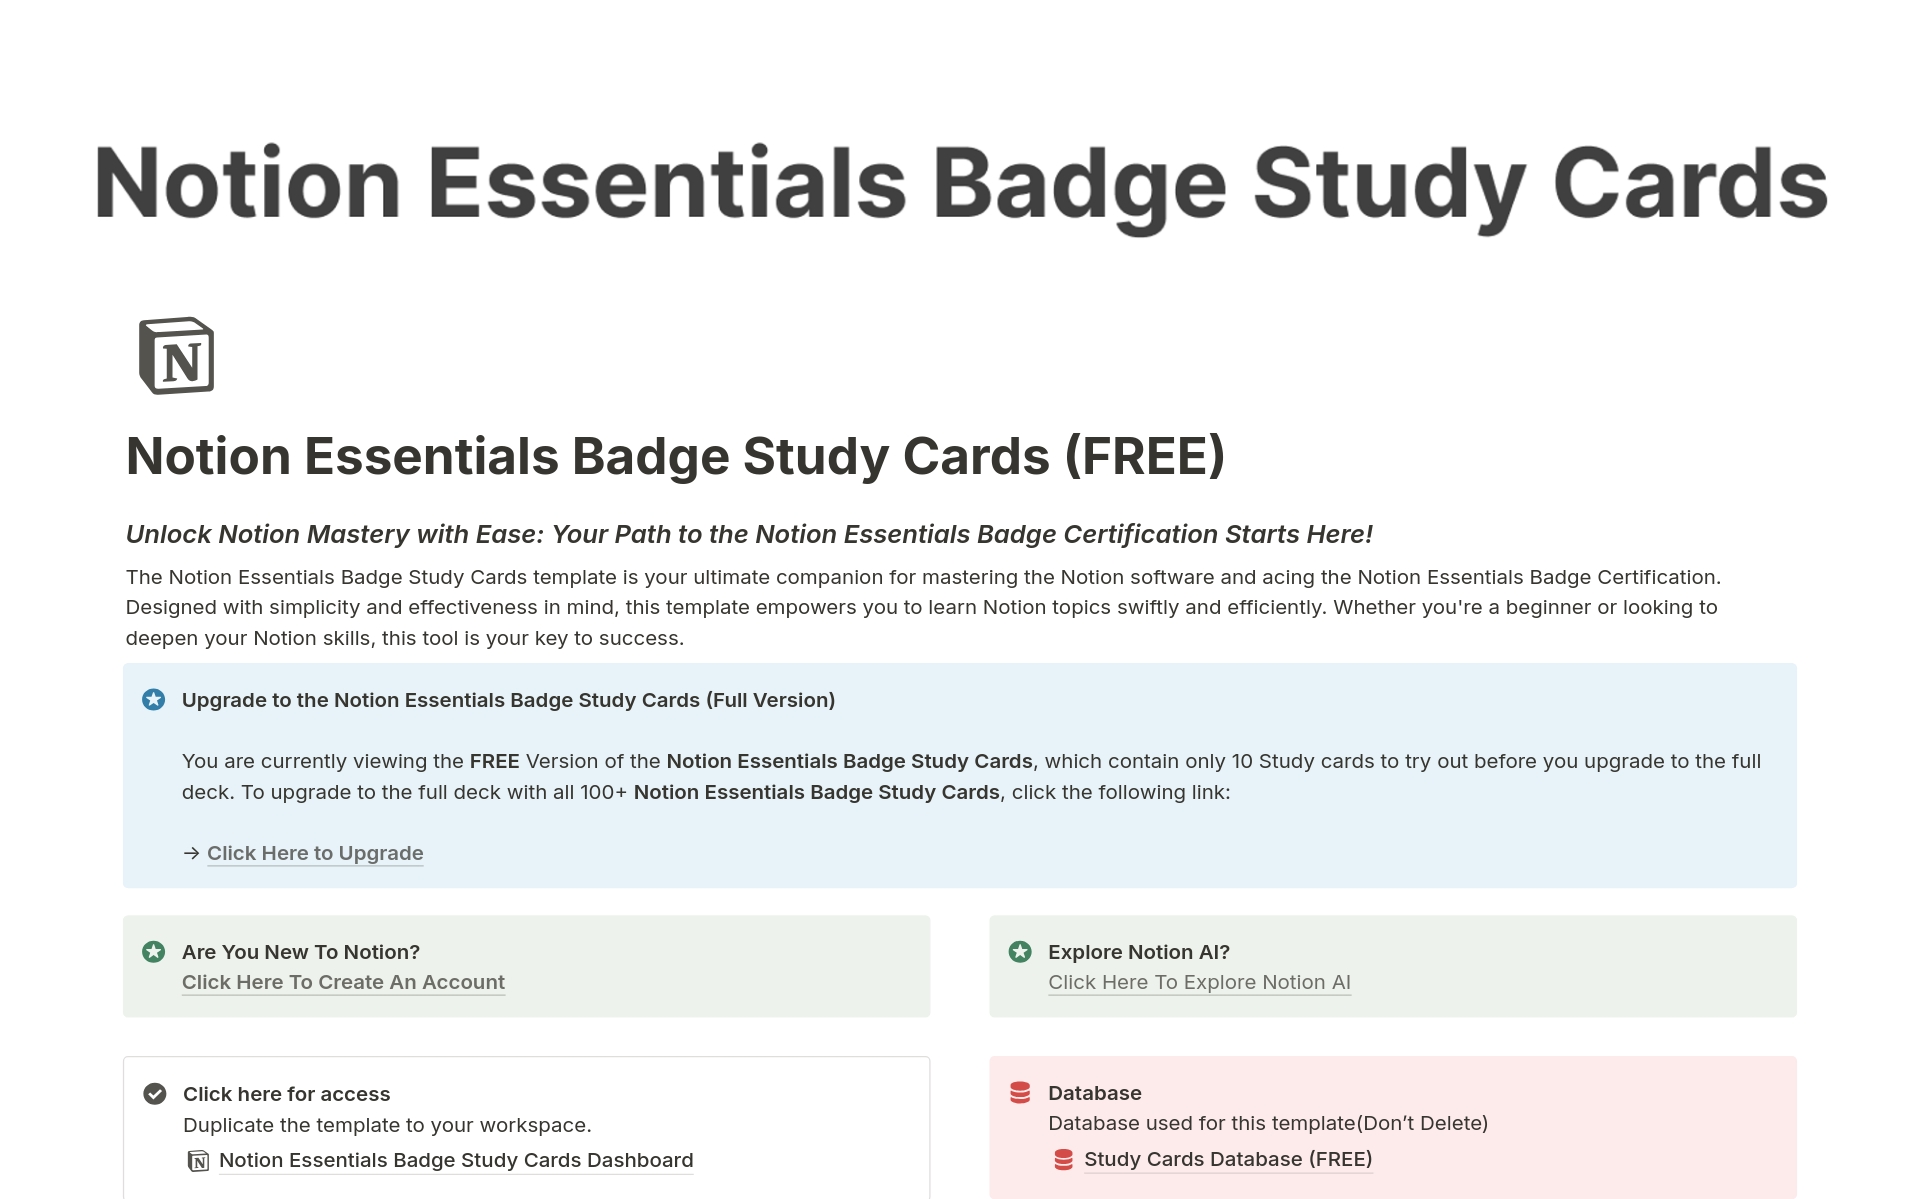 Unlock Notion Mastery with Ease: Your Path to the Notion Essentials Badge Certification Starts Here!